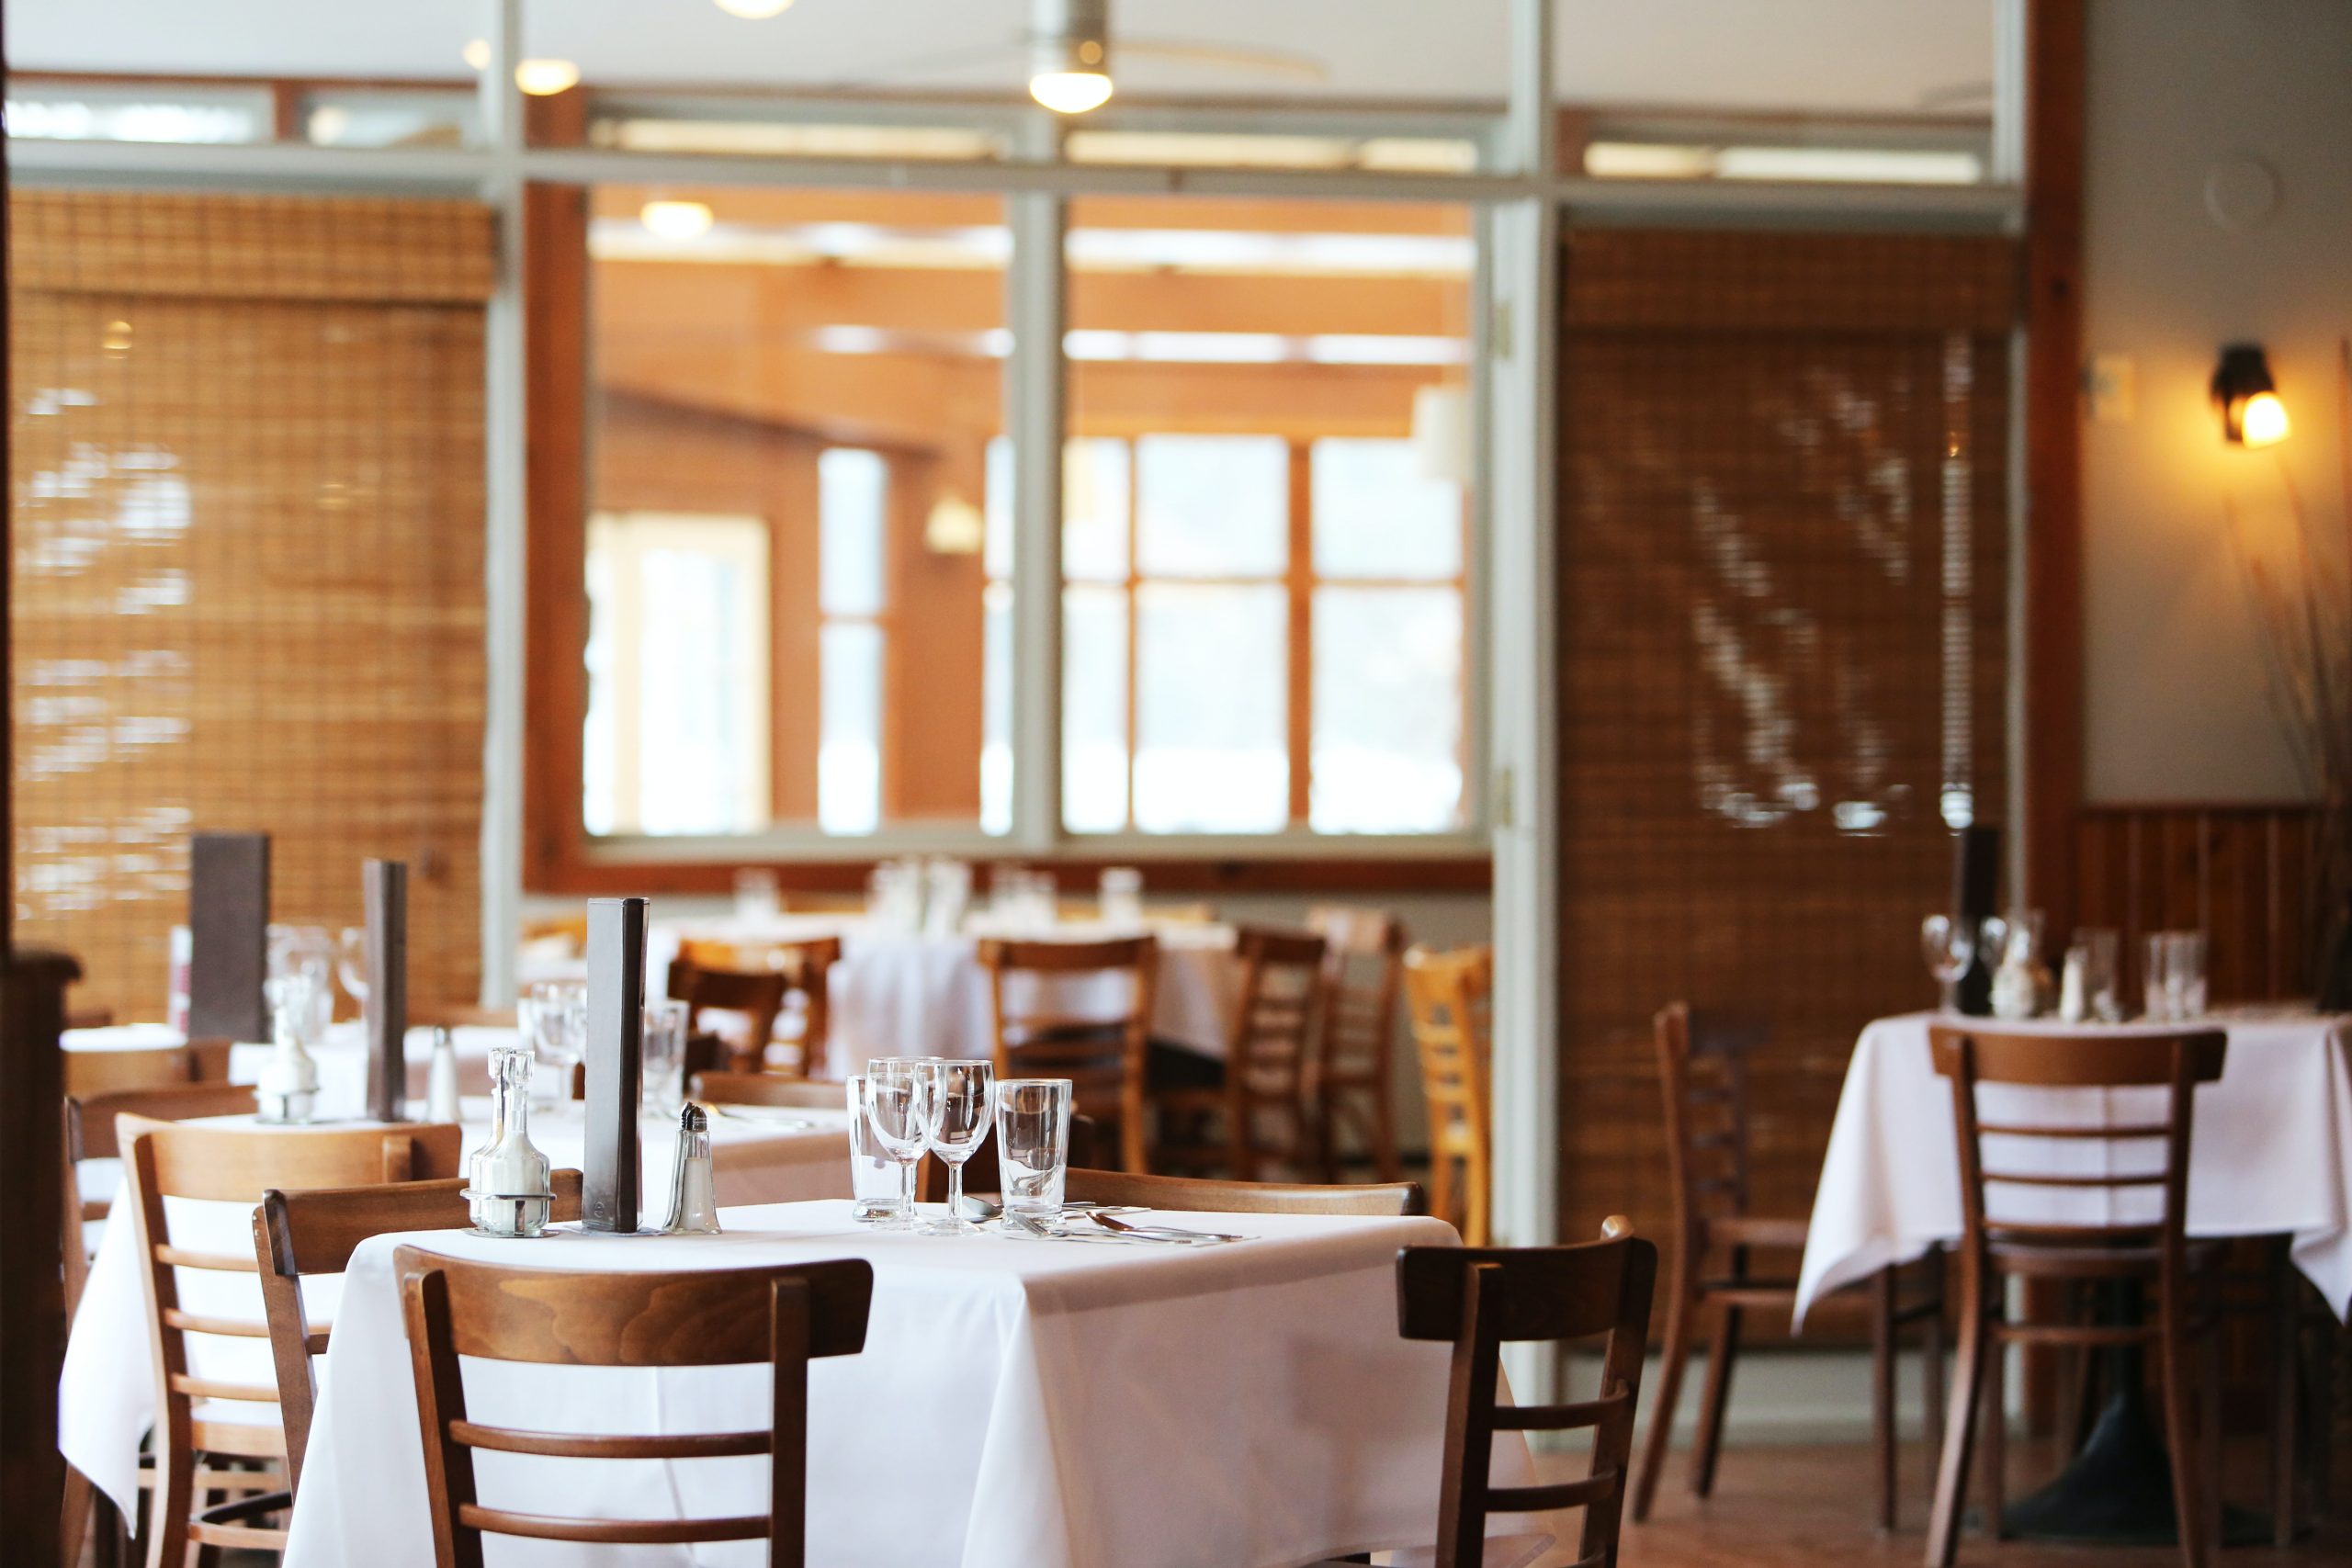 What You Need to Consider Before Opening Your Own Restaurant